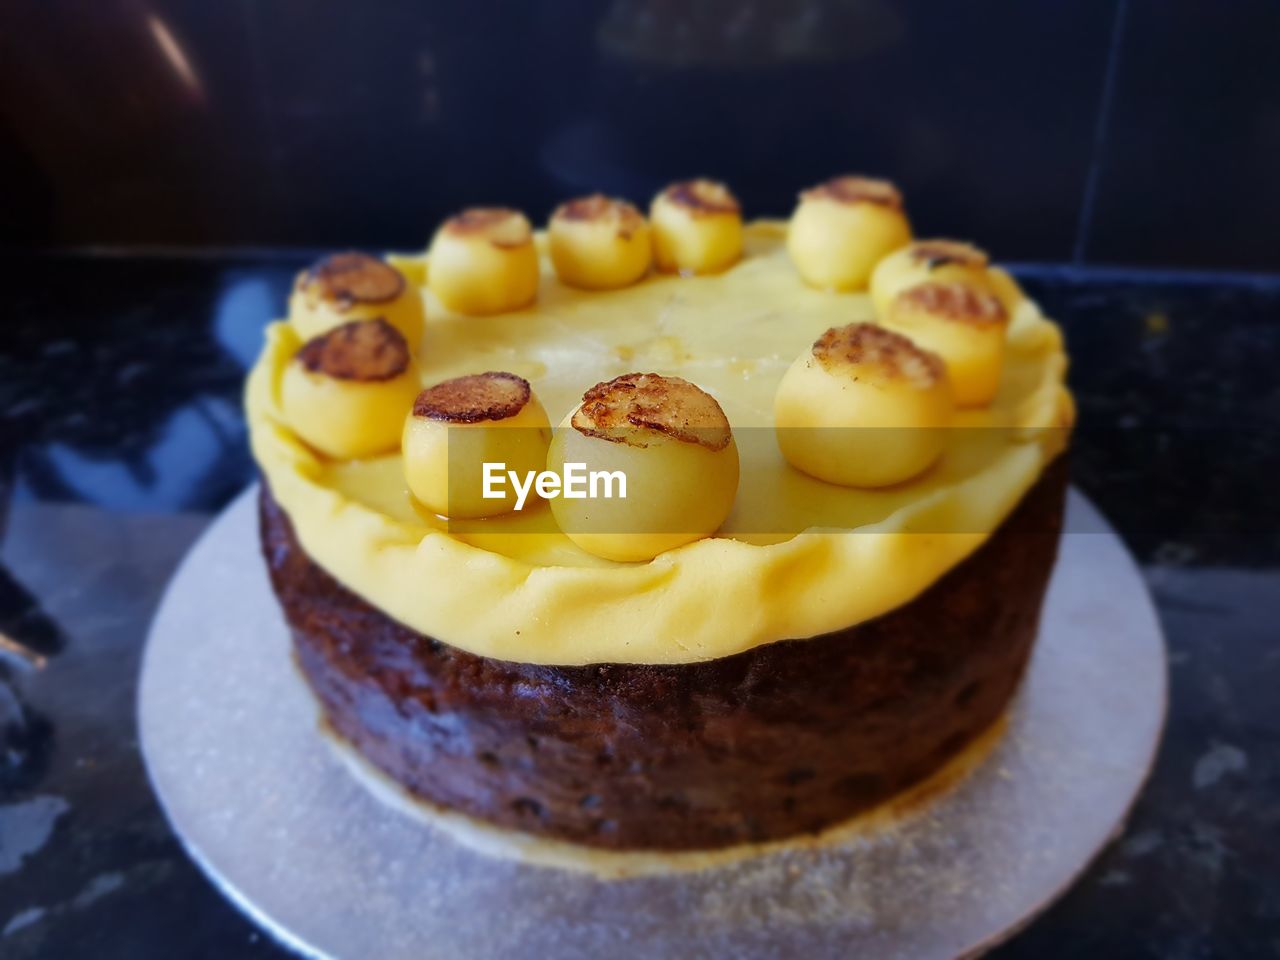 A simple simnel cake for a traditional taste of easter